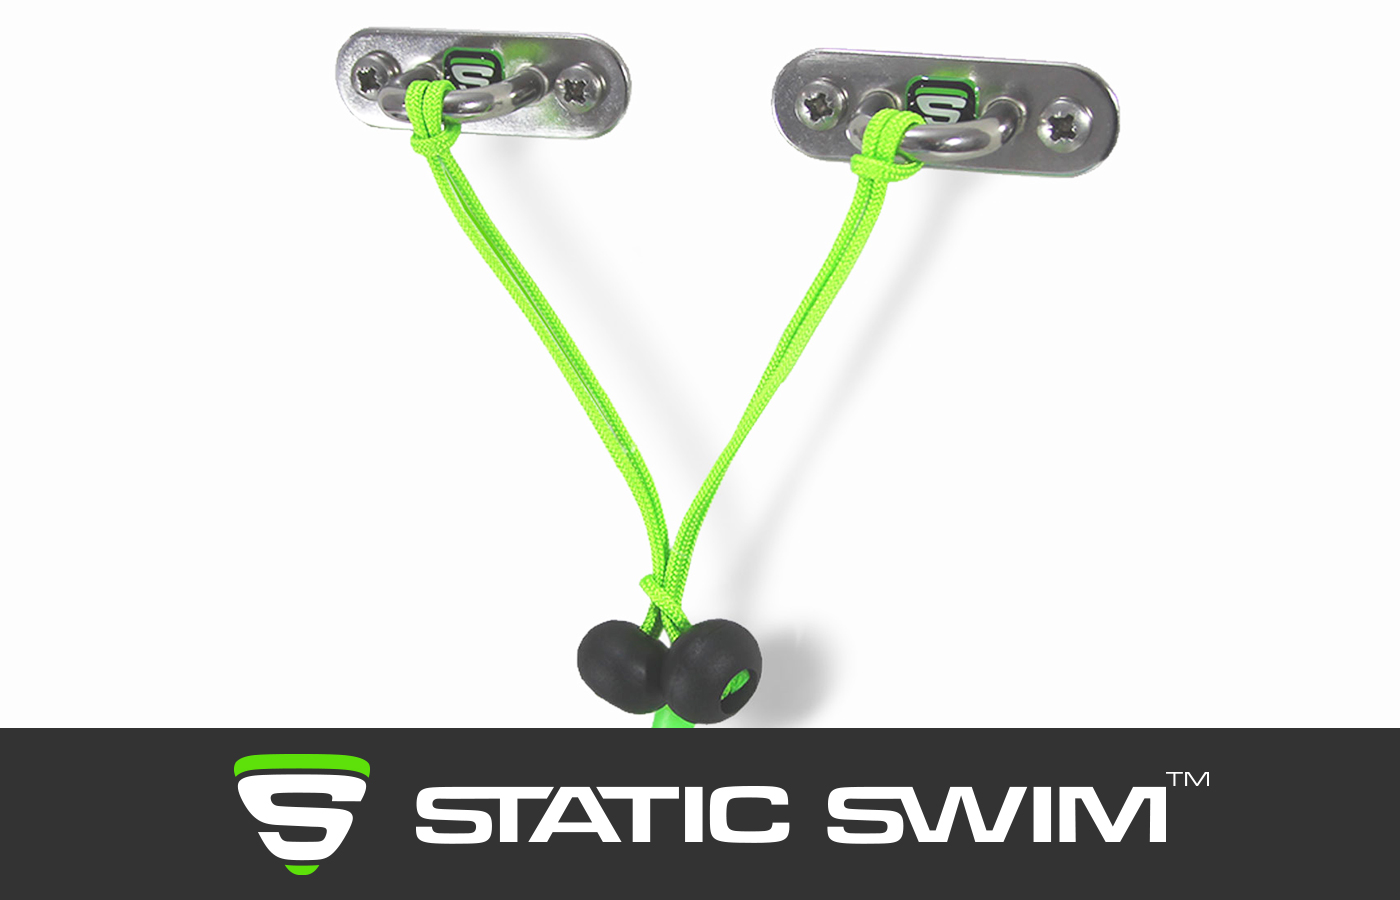 Stationary swimming attachment for Walls